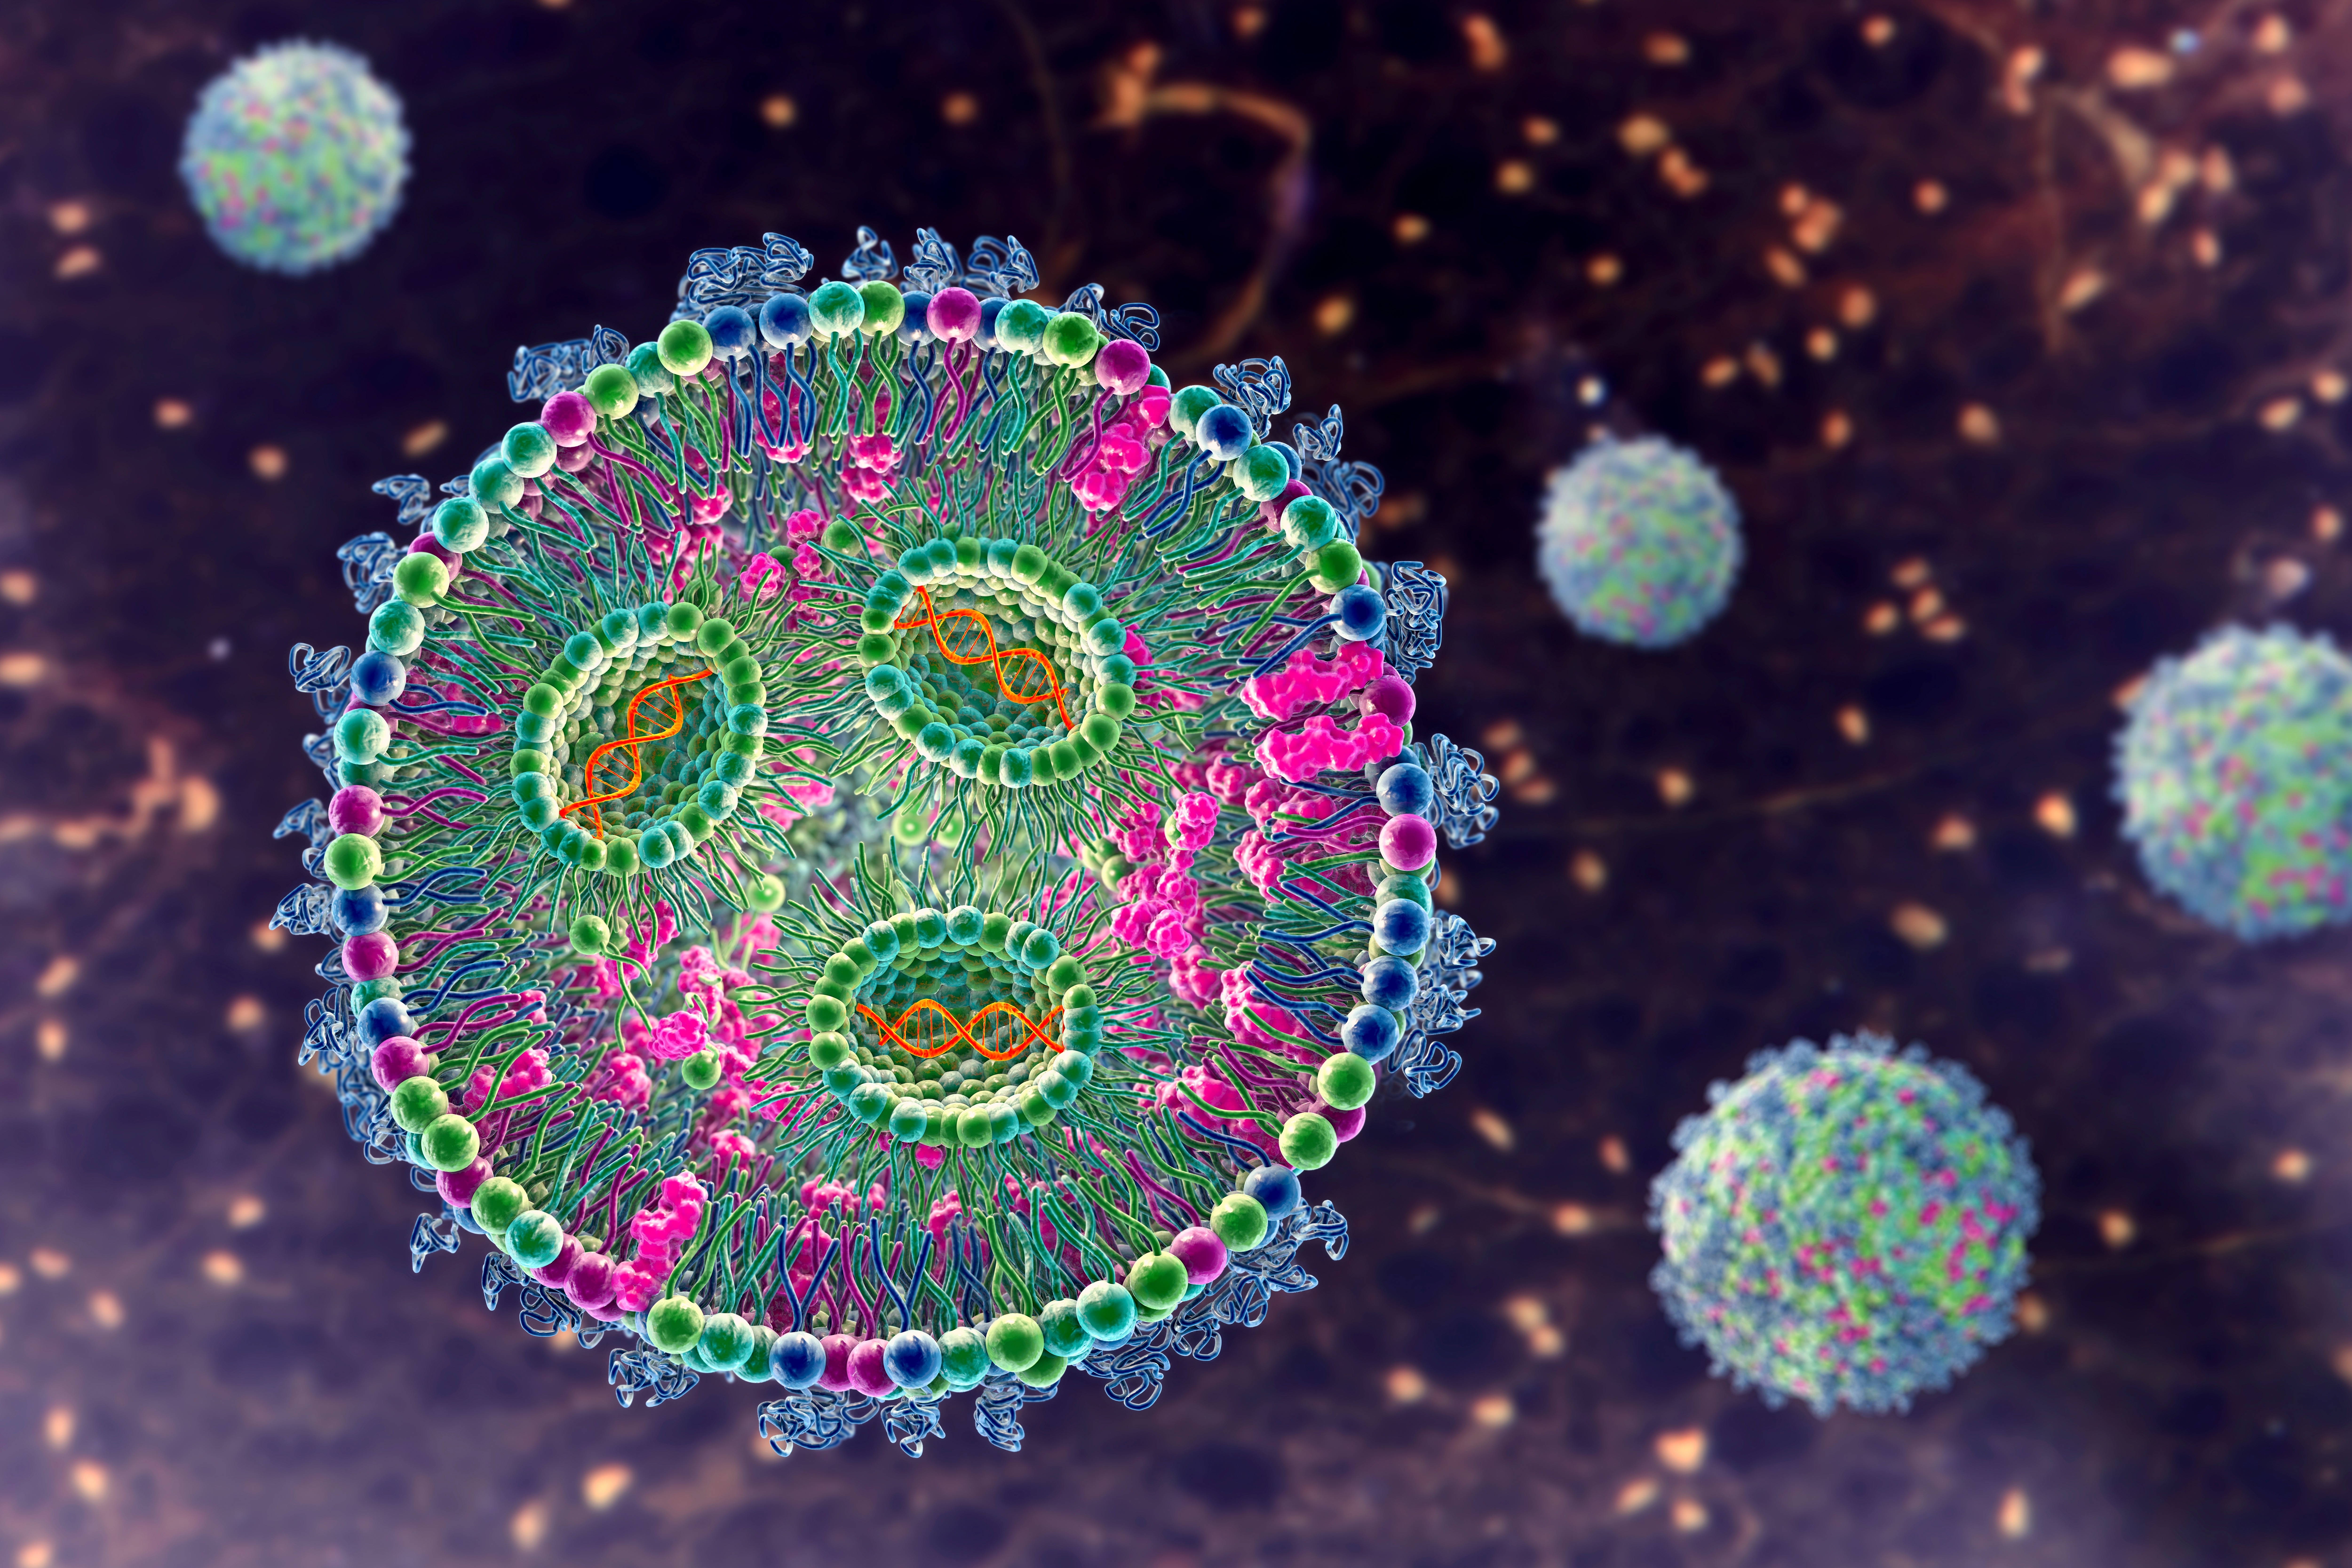 Lipid nanoparticle siRNA antivirals used against Covid-19. 3D illustration showing cross-section of lipid nanoparticle carrying siRNA of the virus